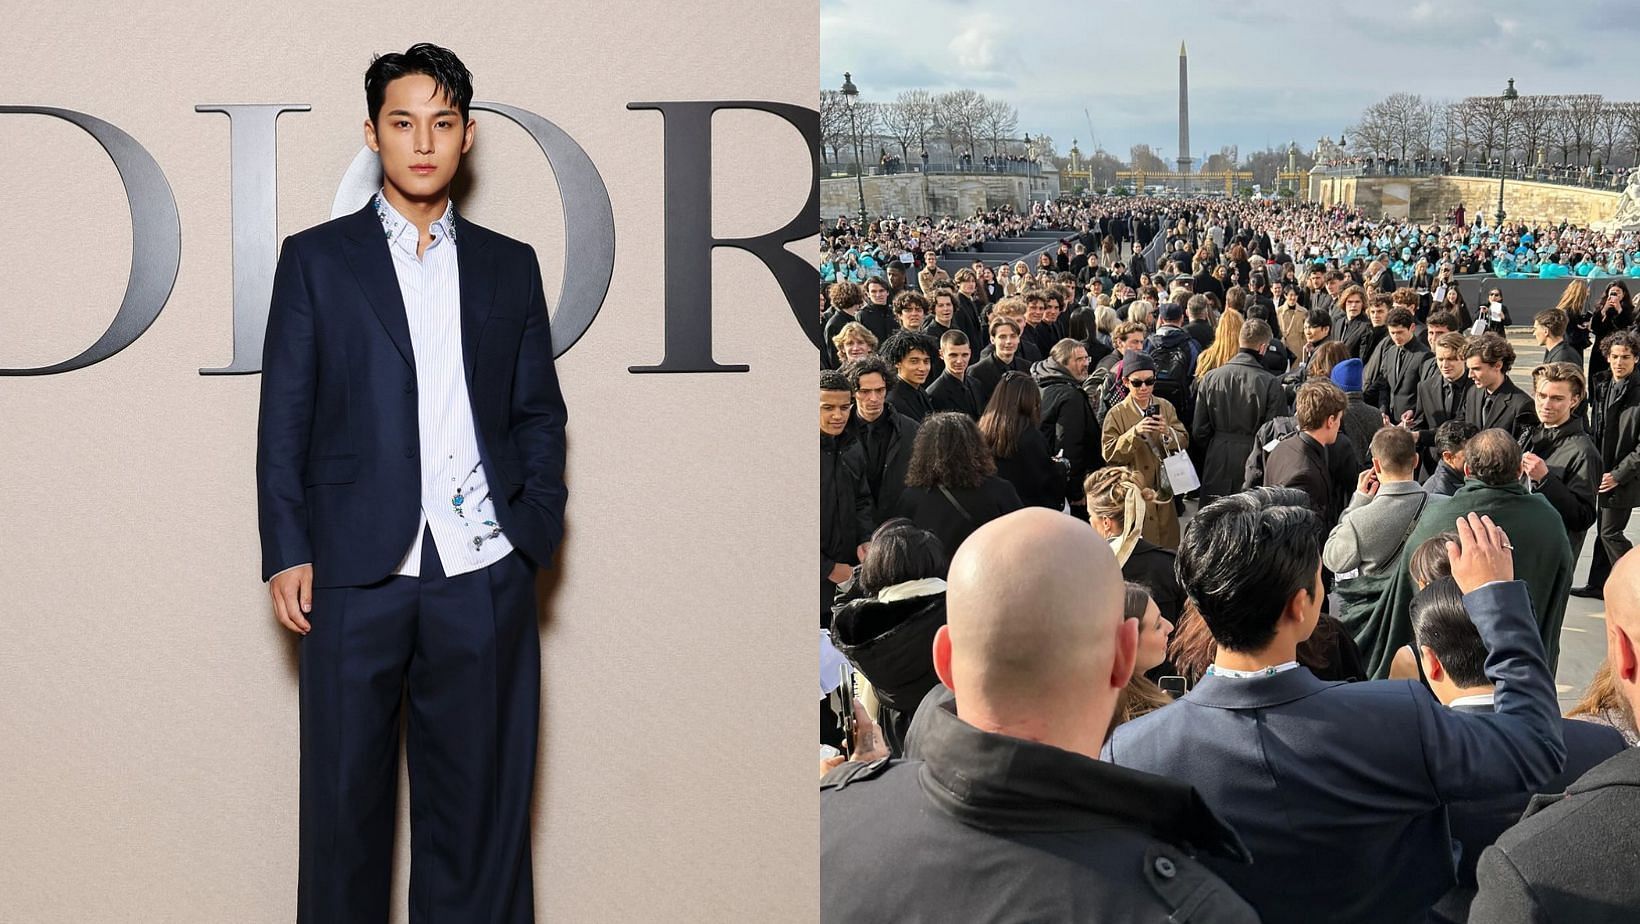 &ldquo;The golden retriever in him is thriving&rdquo;: Fans react as a video of SEVENTEEN&rsquo;s Mingyu smiling through the mobbing crowd at the Dior show goes viral. (Images via X/@dior &amp; Instagram/@min9yu_k)